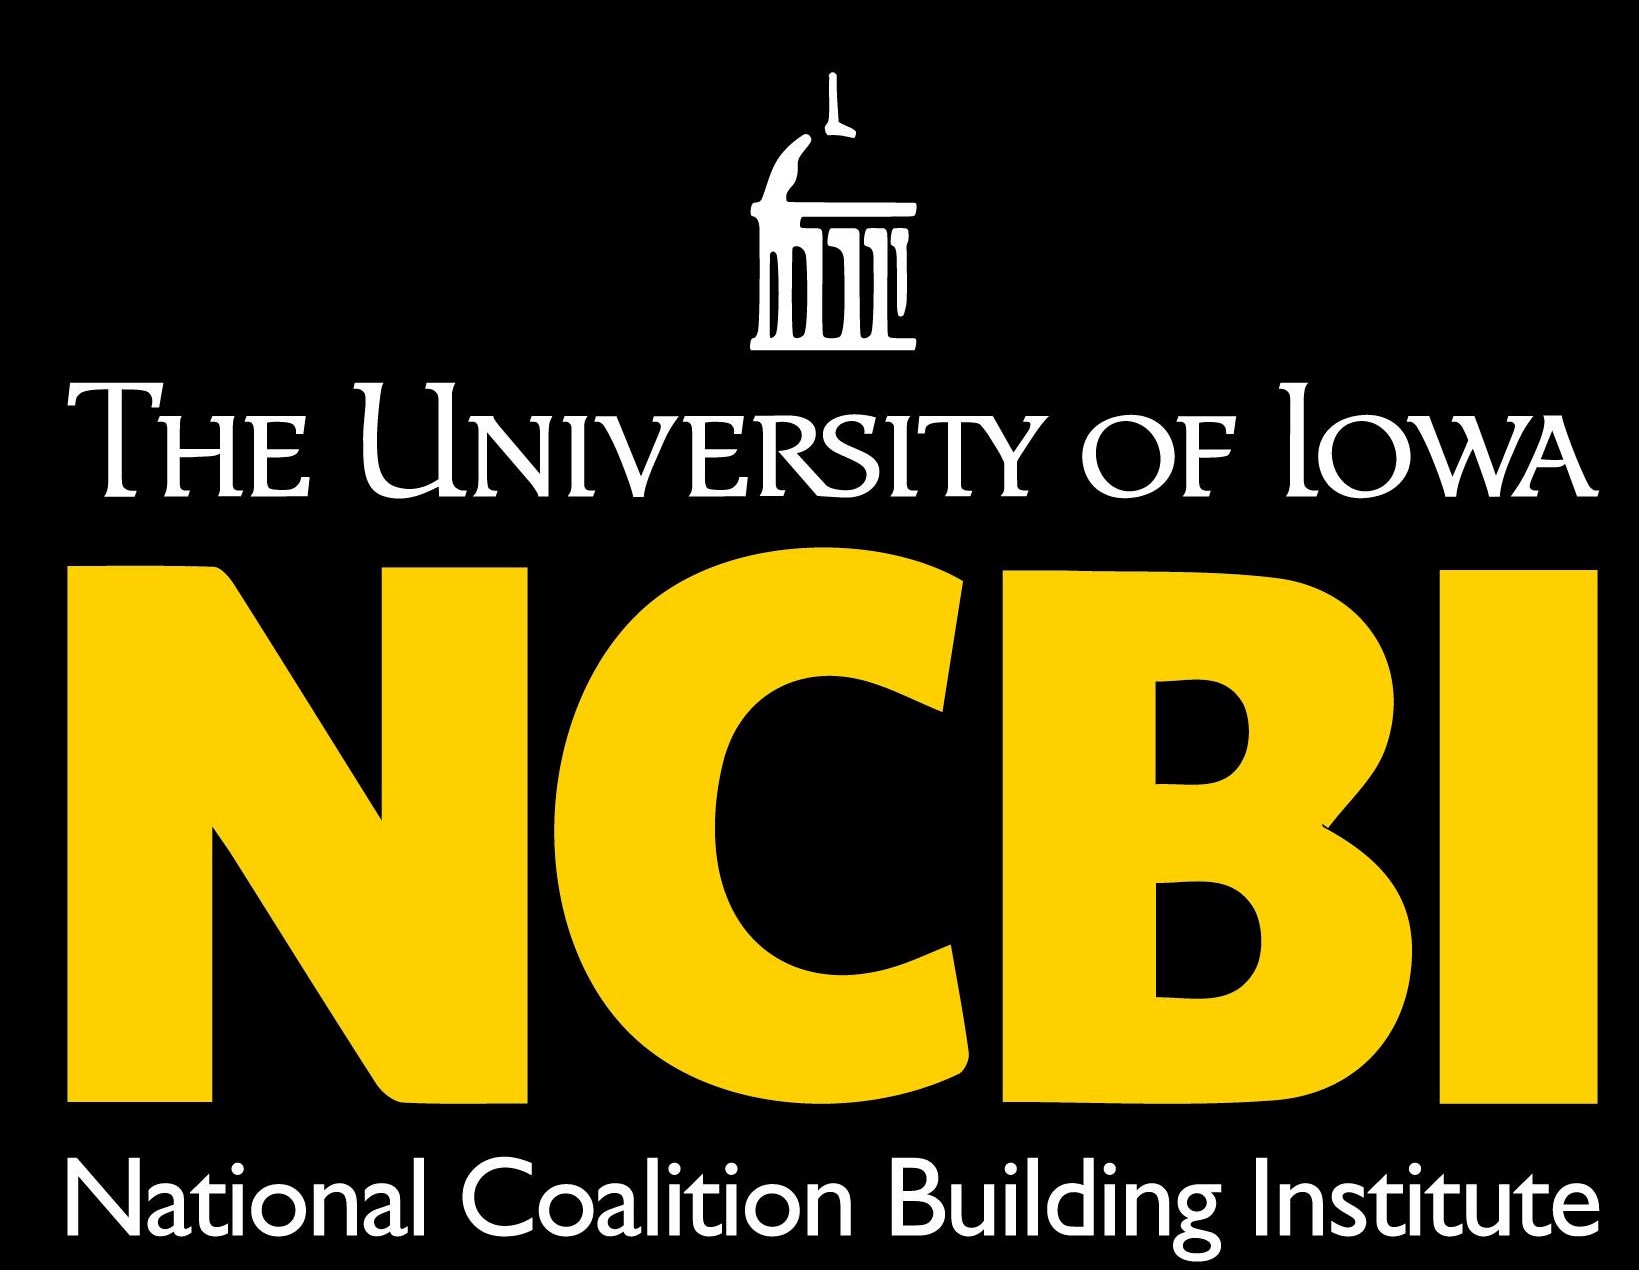 White image of the UI dome above the words University of Iowa also in white. NCBI in capital letters below in yellow with National Coalition Building Institute in white below.